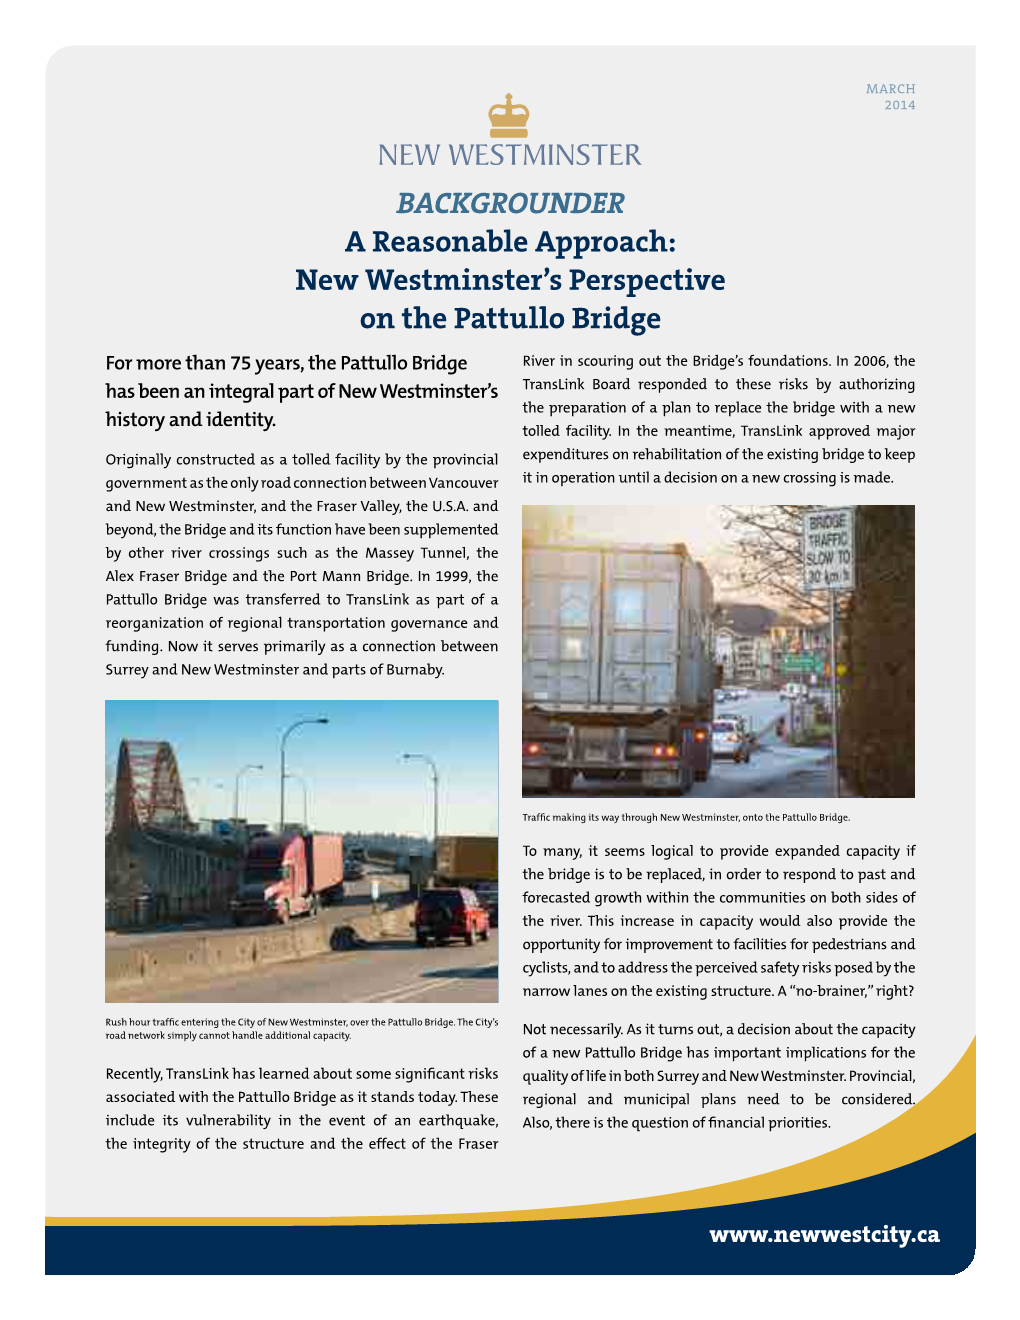 New Westminster's Perspective on the Pattullo Bridge